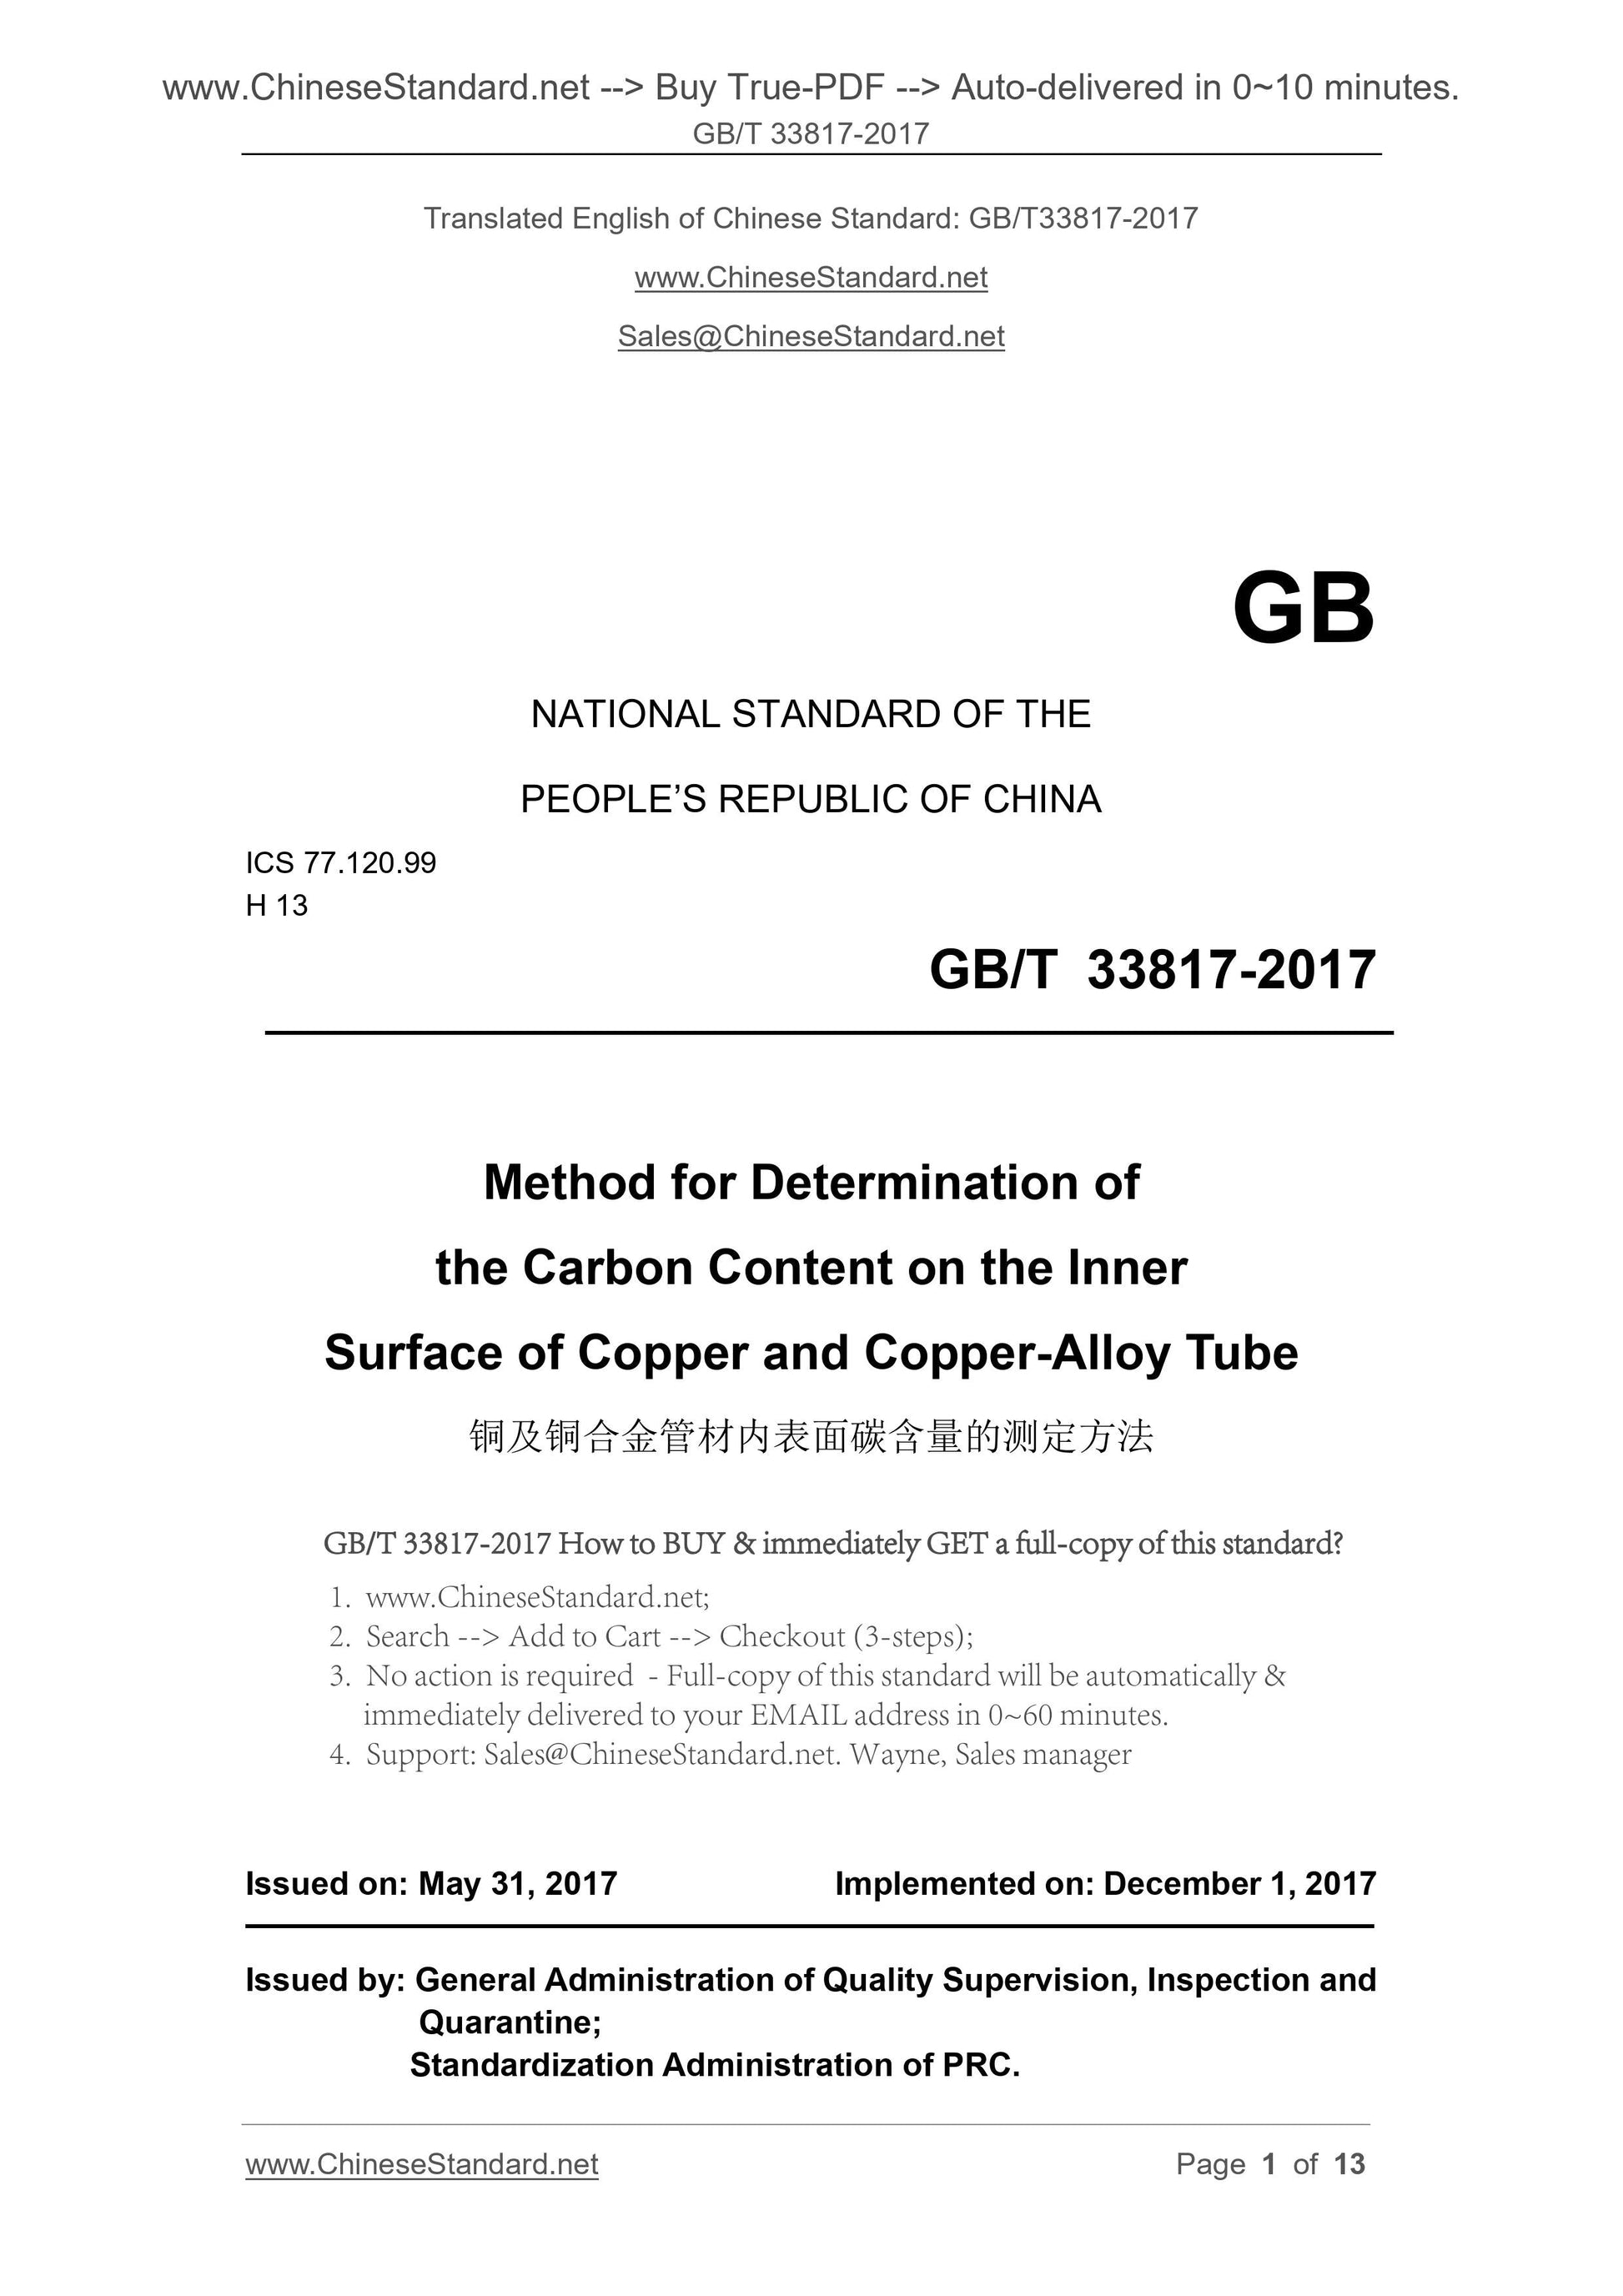 GB/T 33817-2017 Page 1